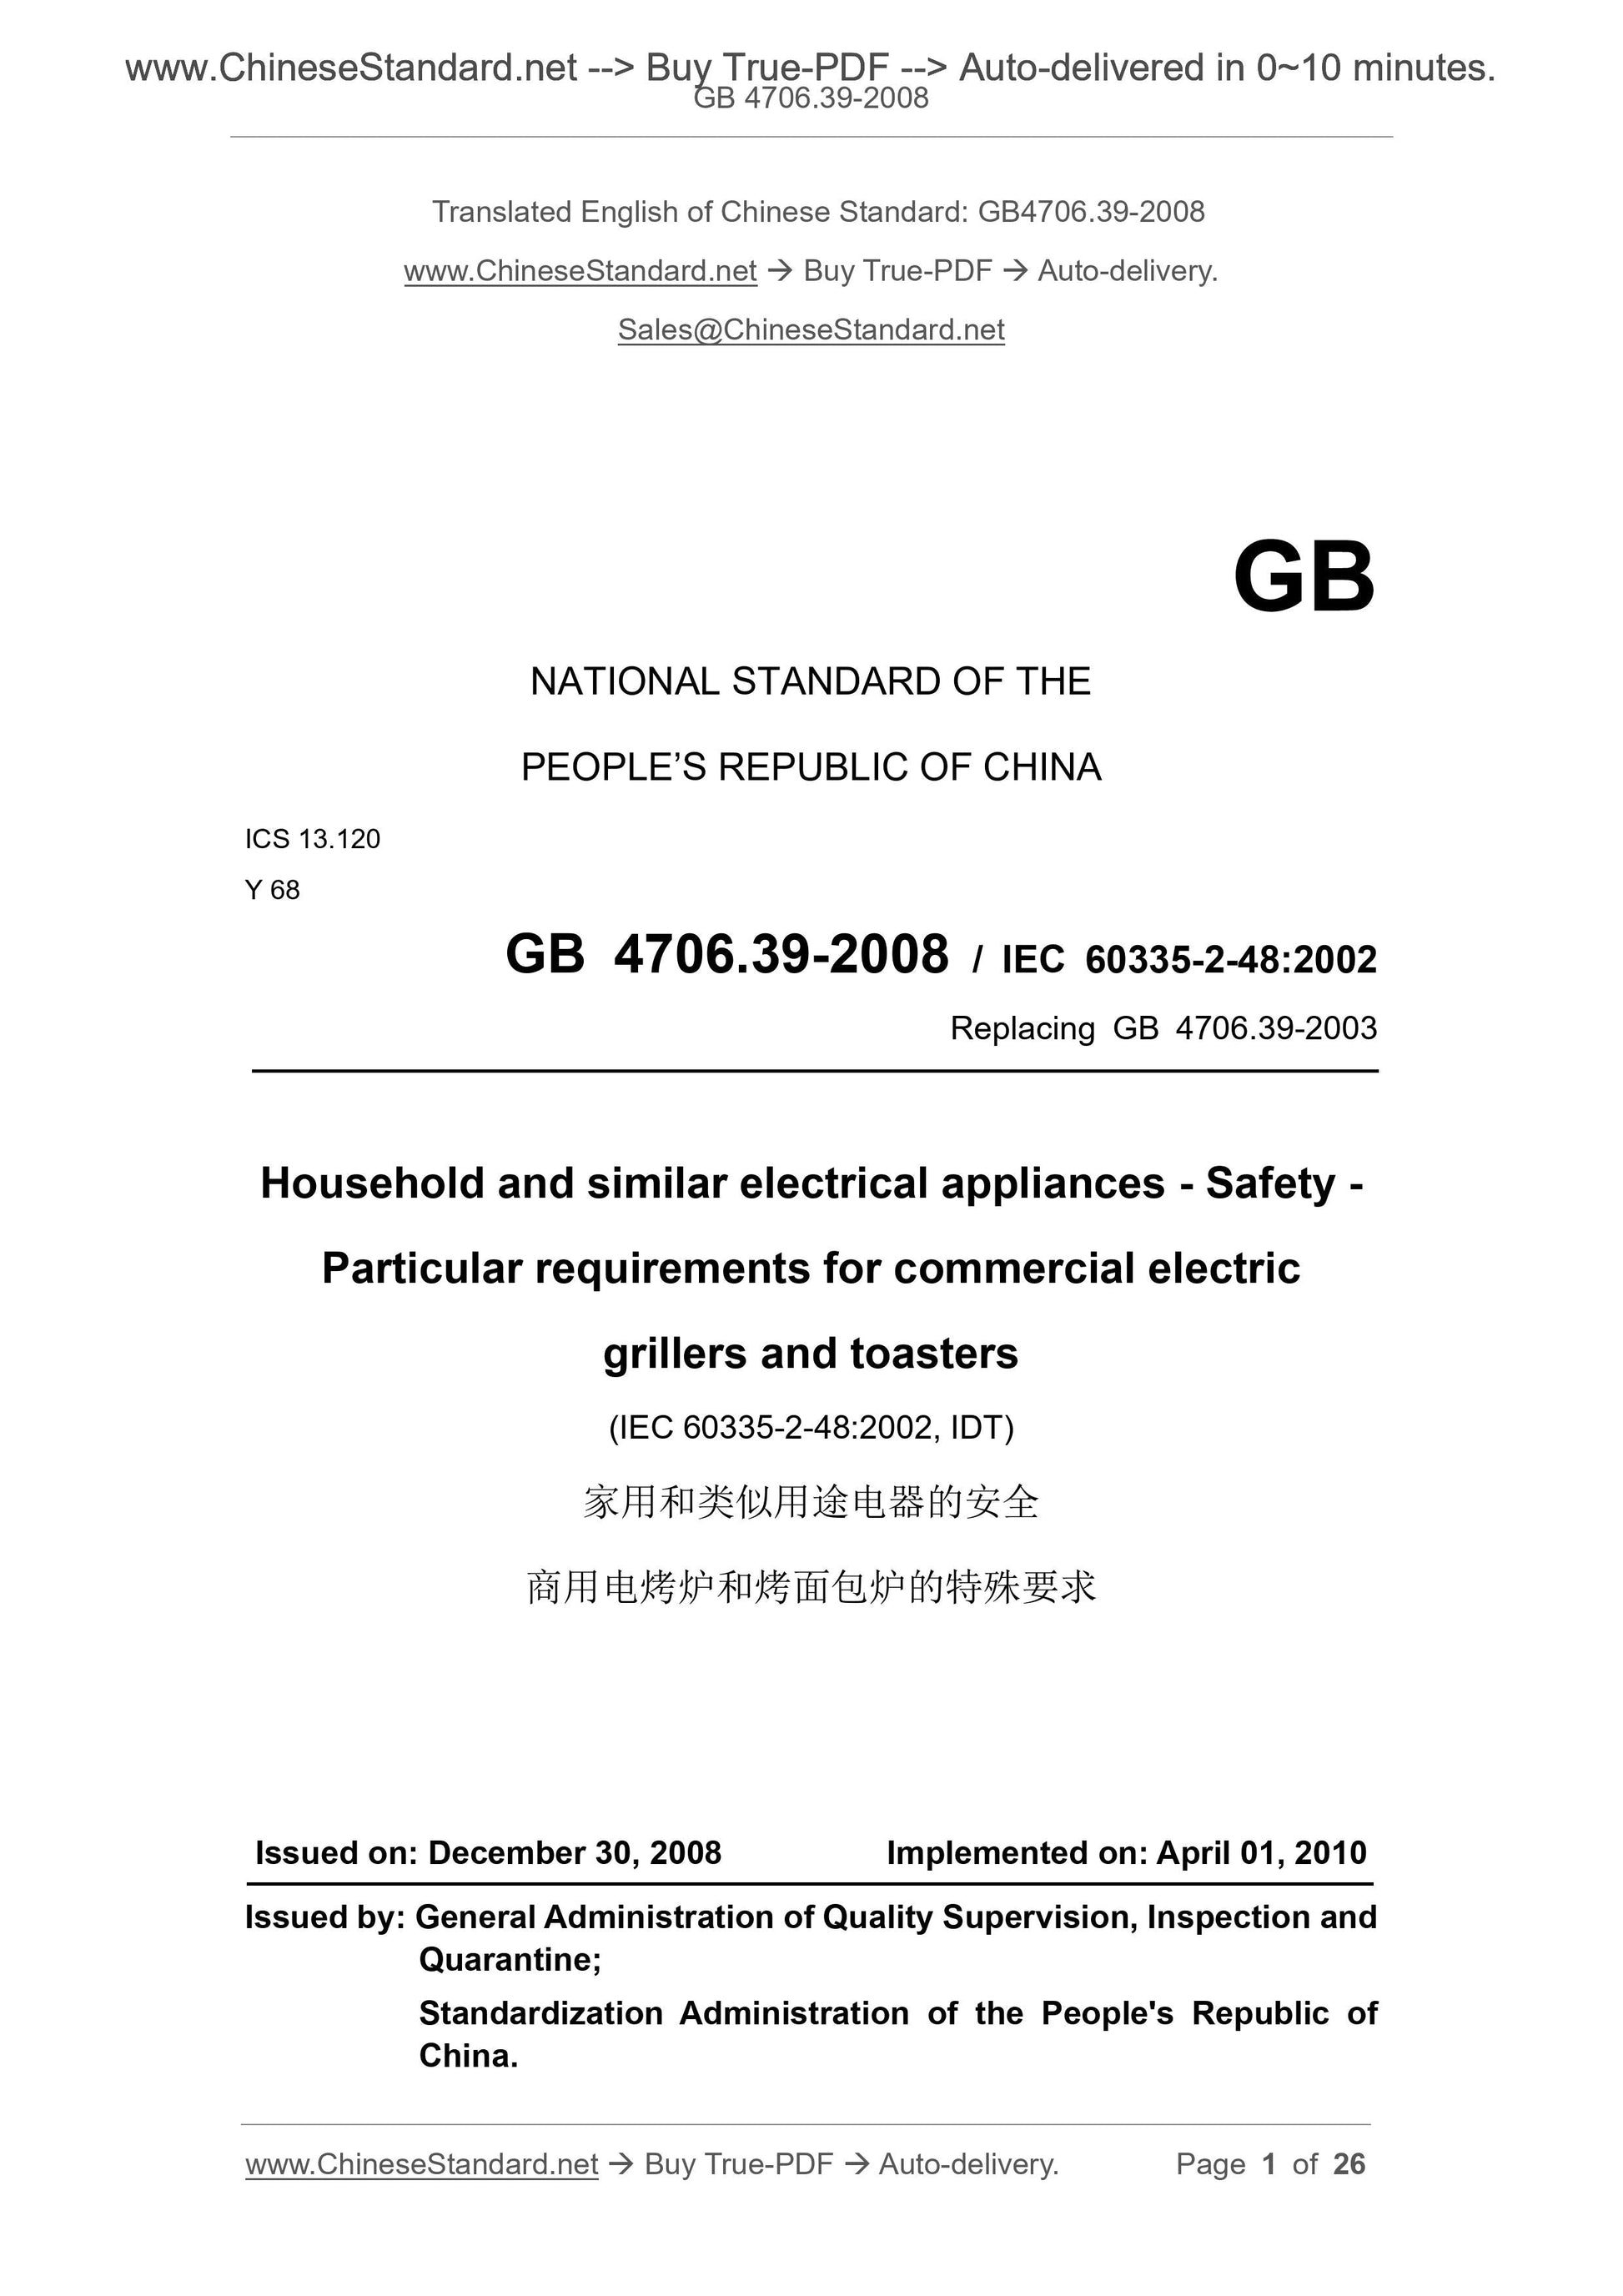 GB 4706.39-2008 Page 1